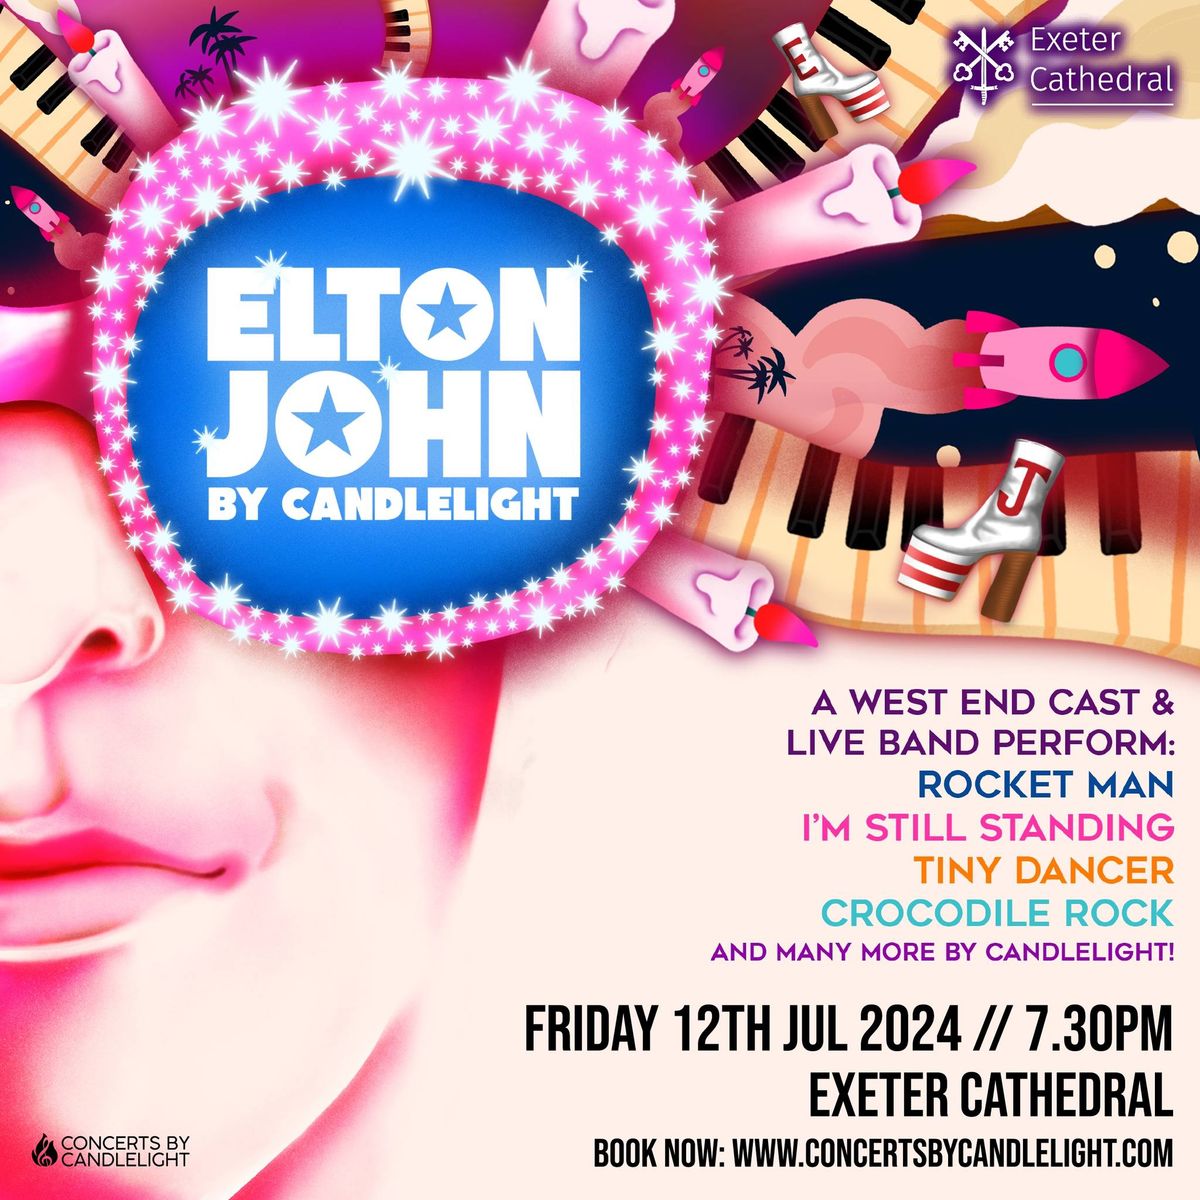 Elton John By Candlelight At Exeter Cathedral